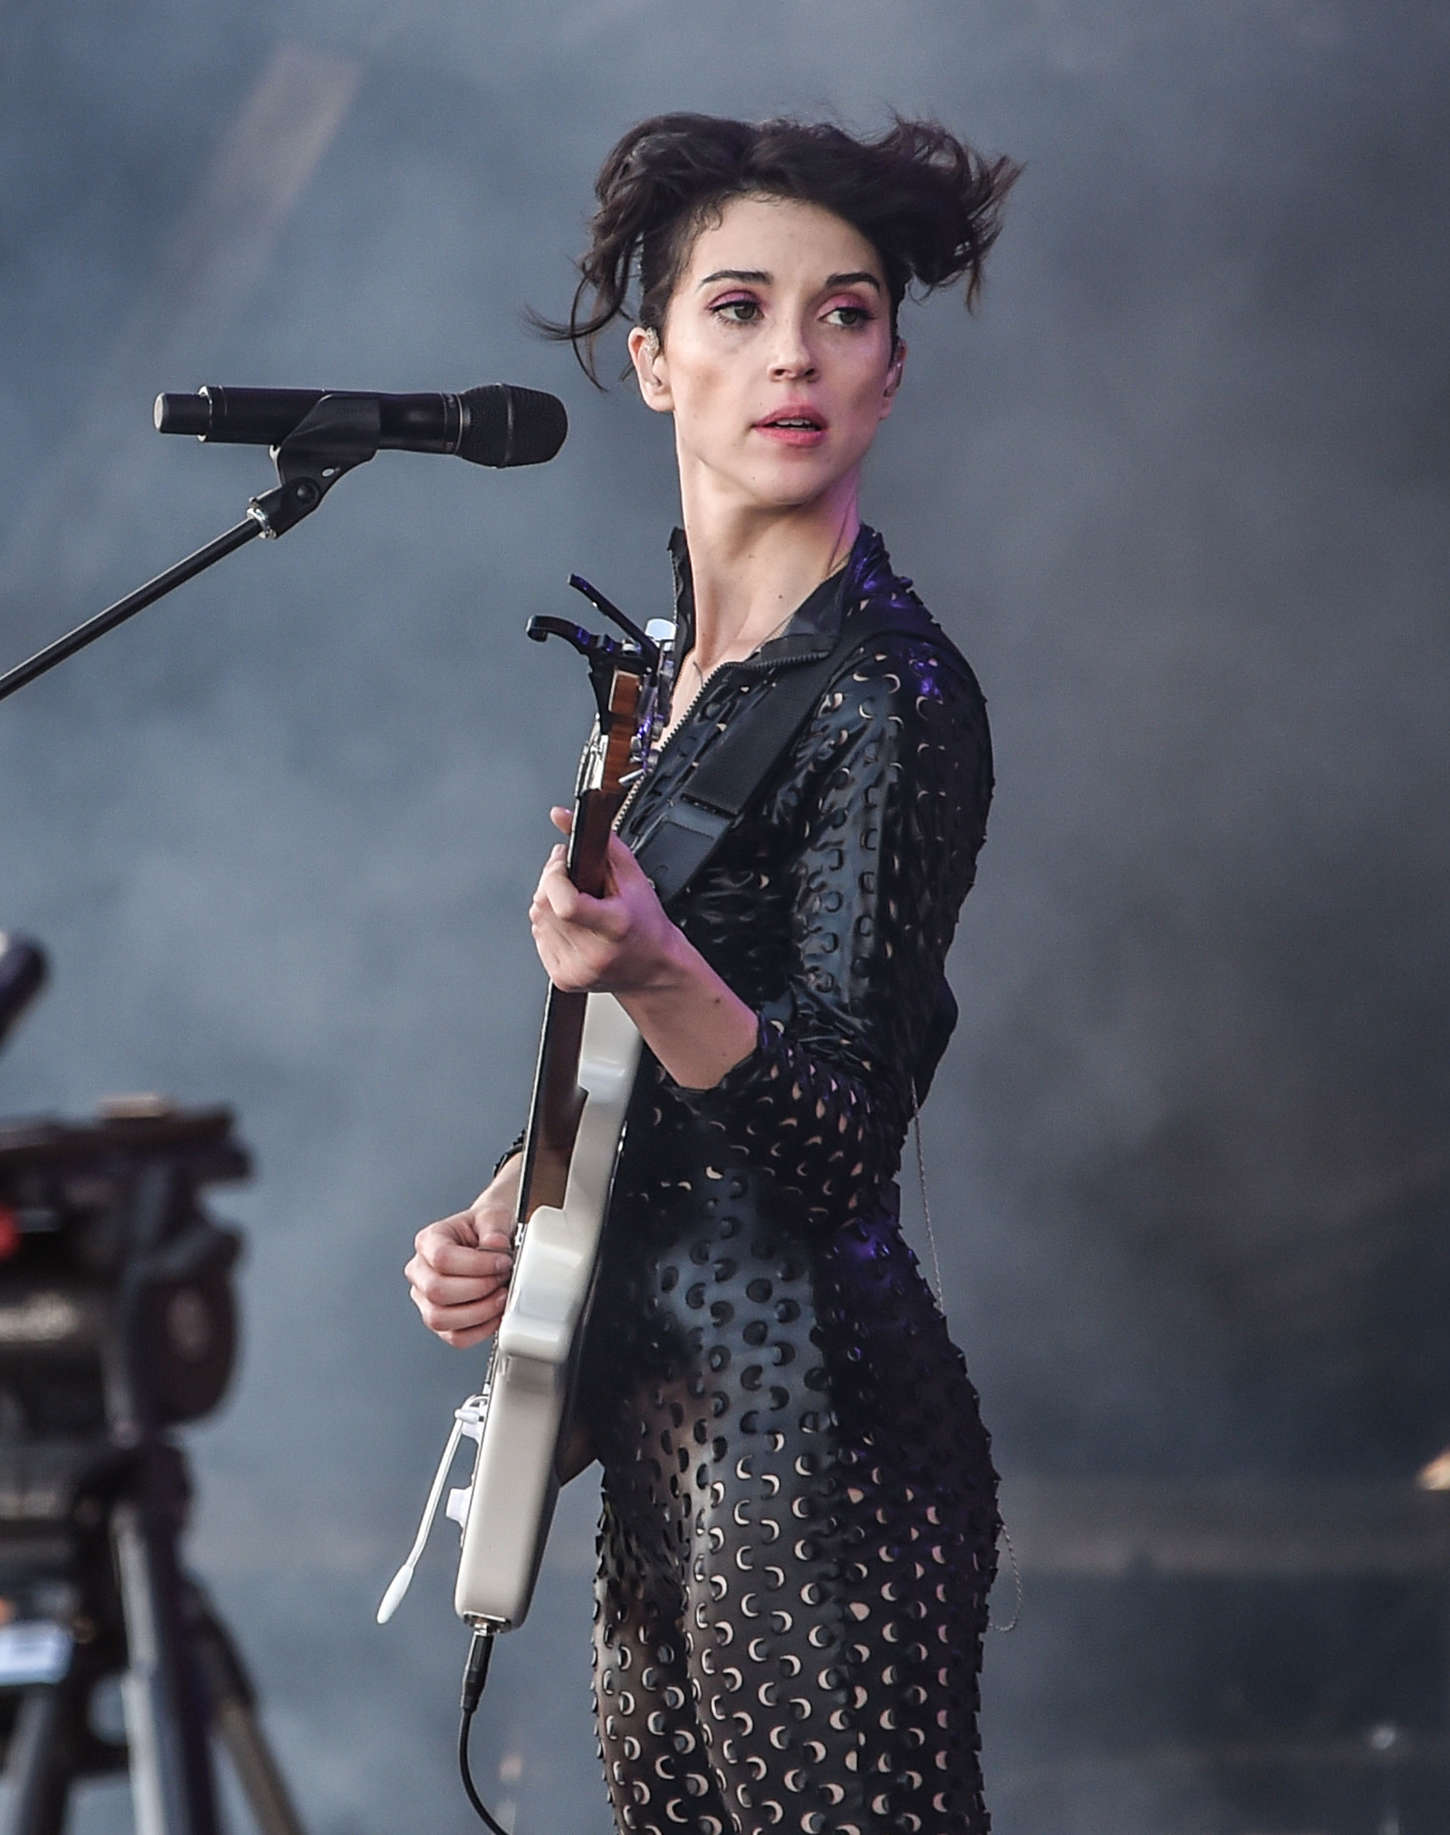 Annie Clark performing at the Osheaga Music and Arts Festival